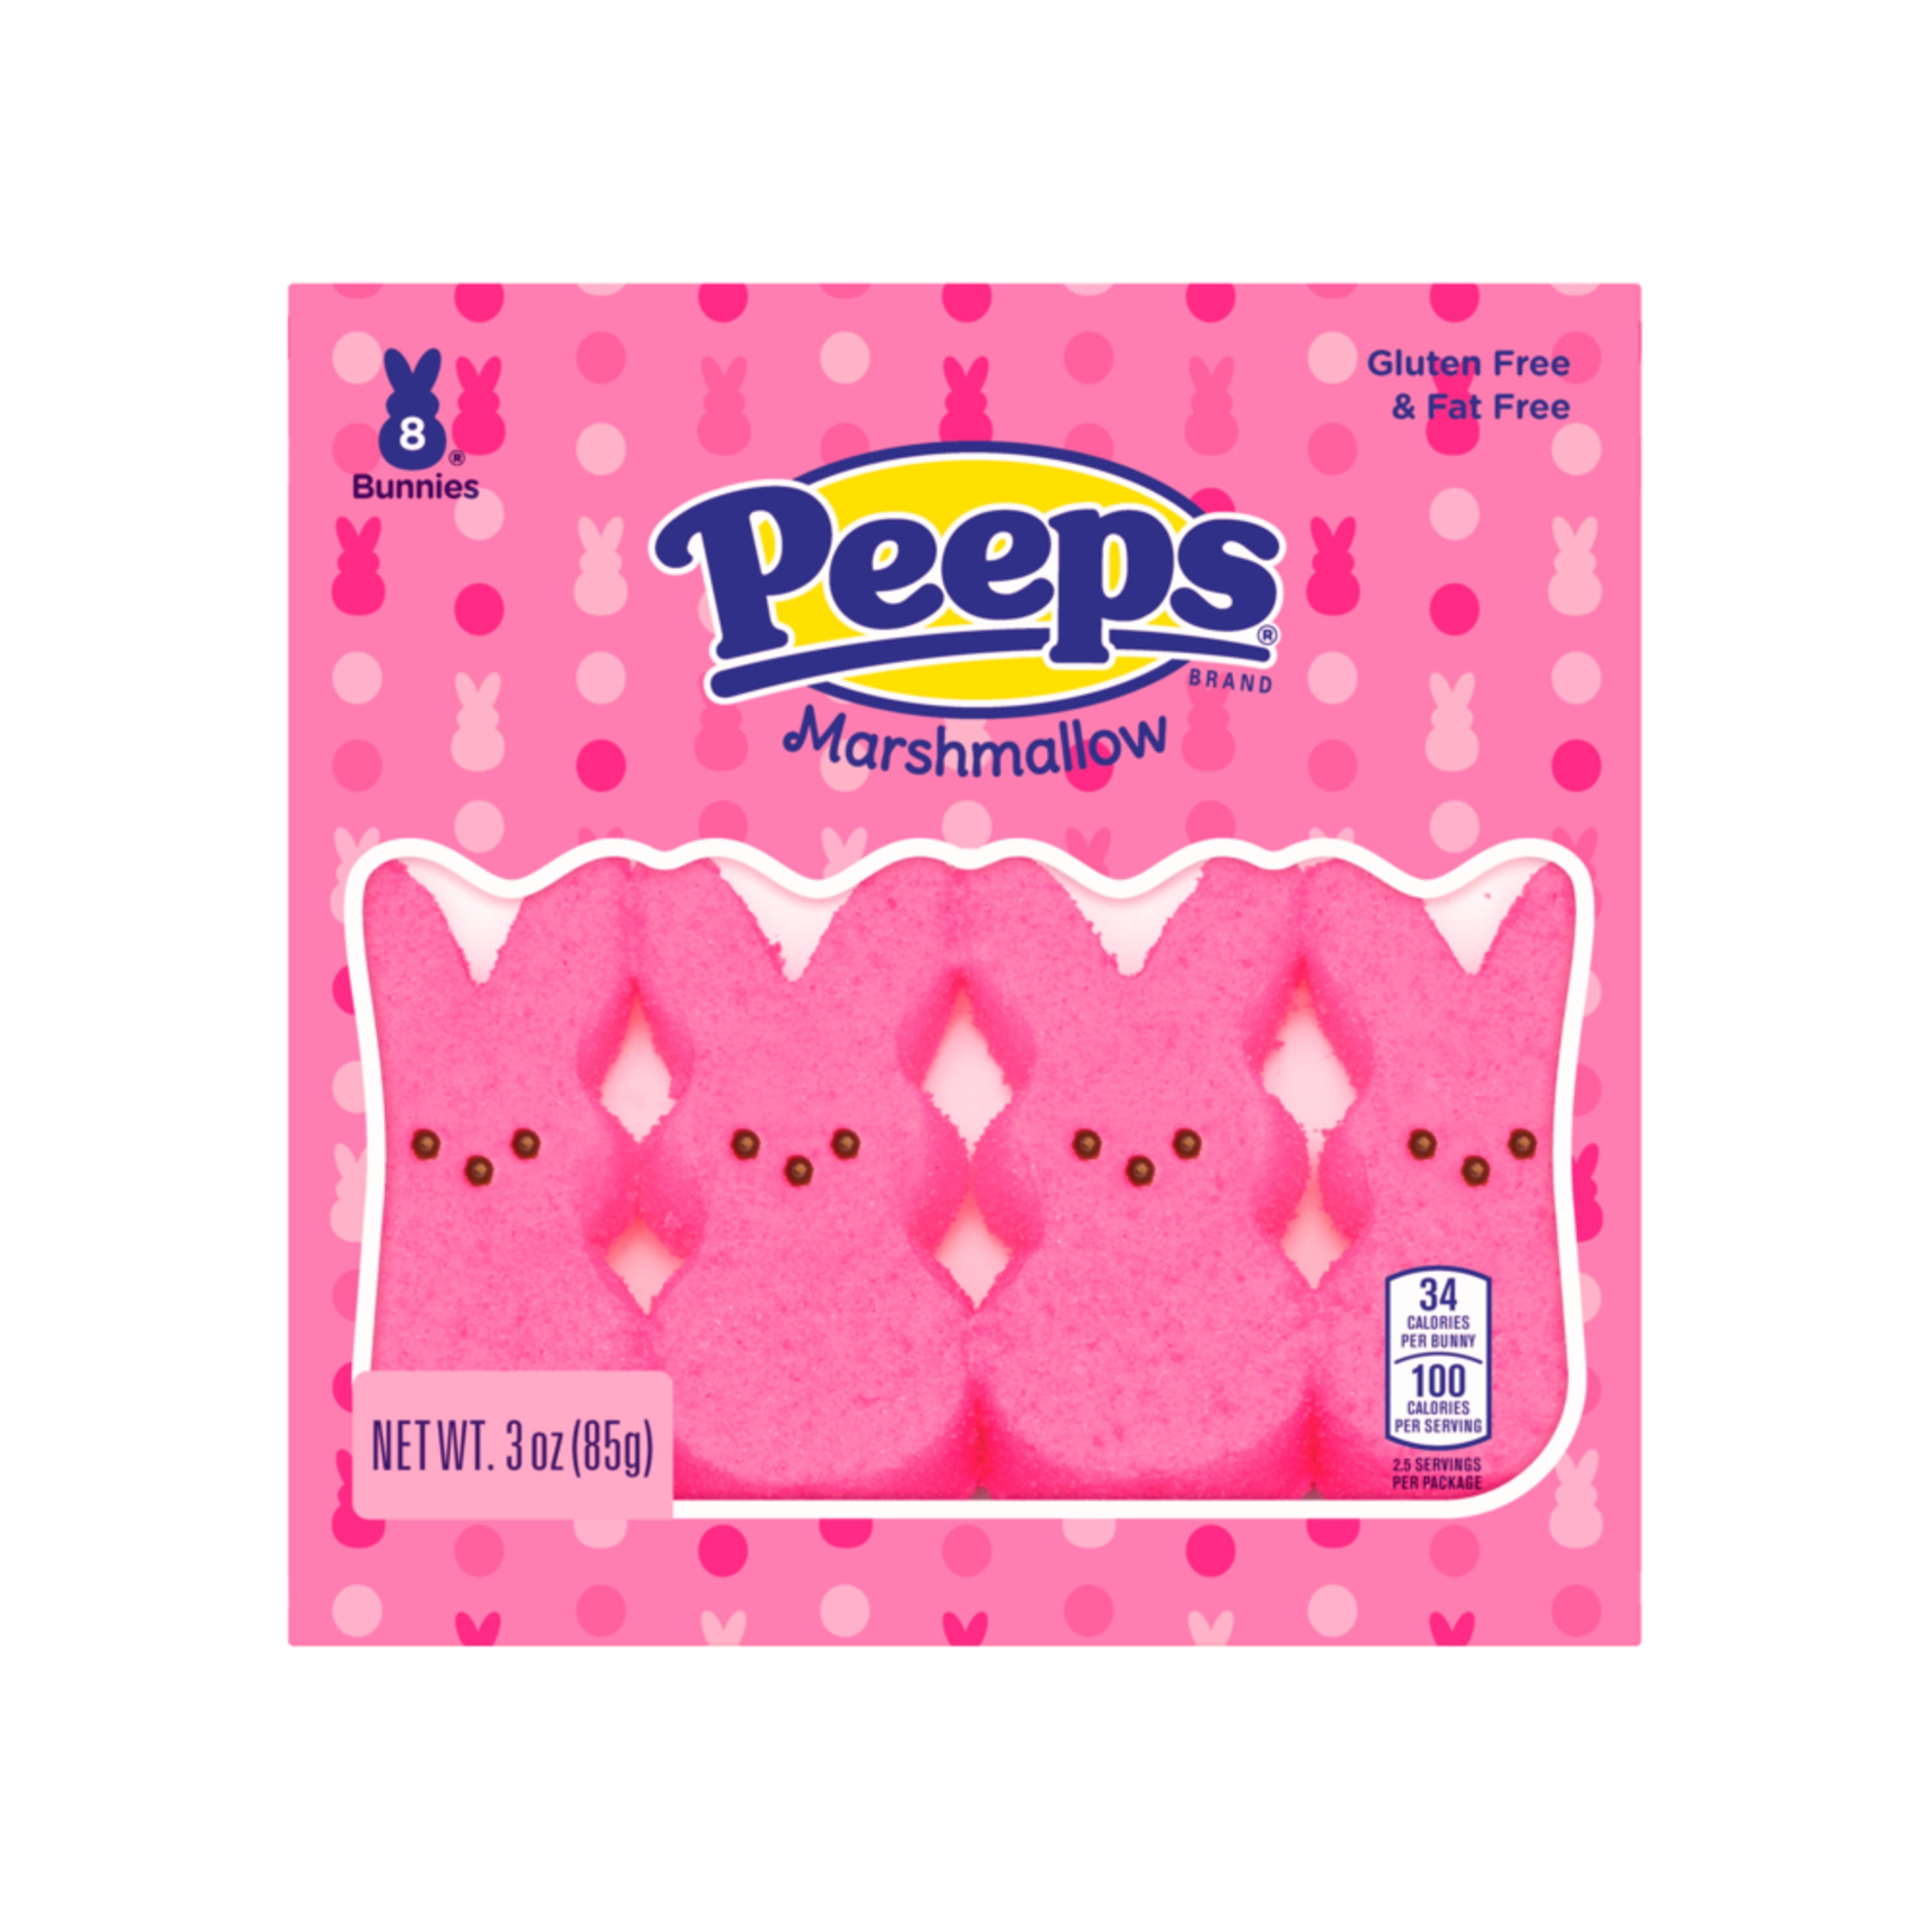 Peeps Marshmallow Easter Bunnies Bundle with 4 Colors Blue, Yellow